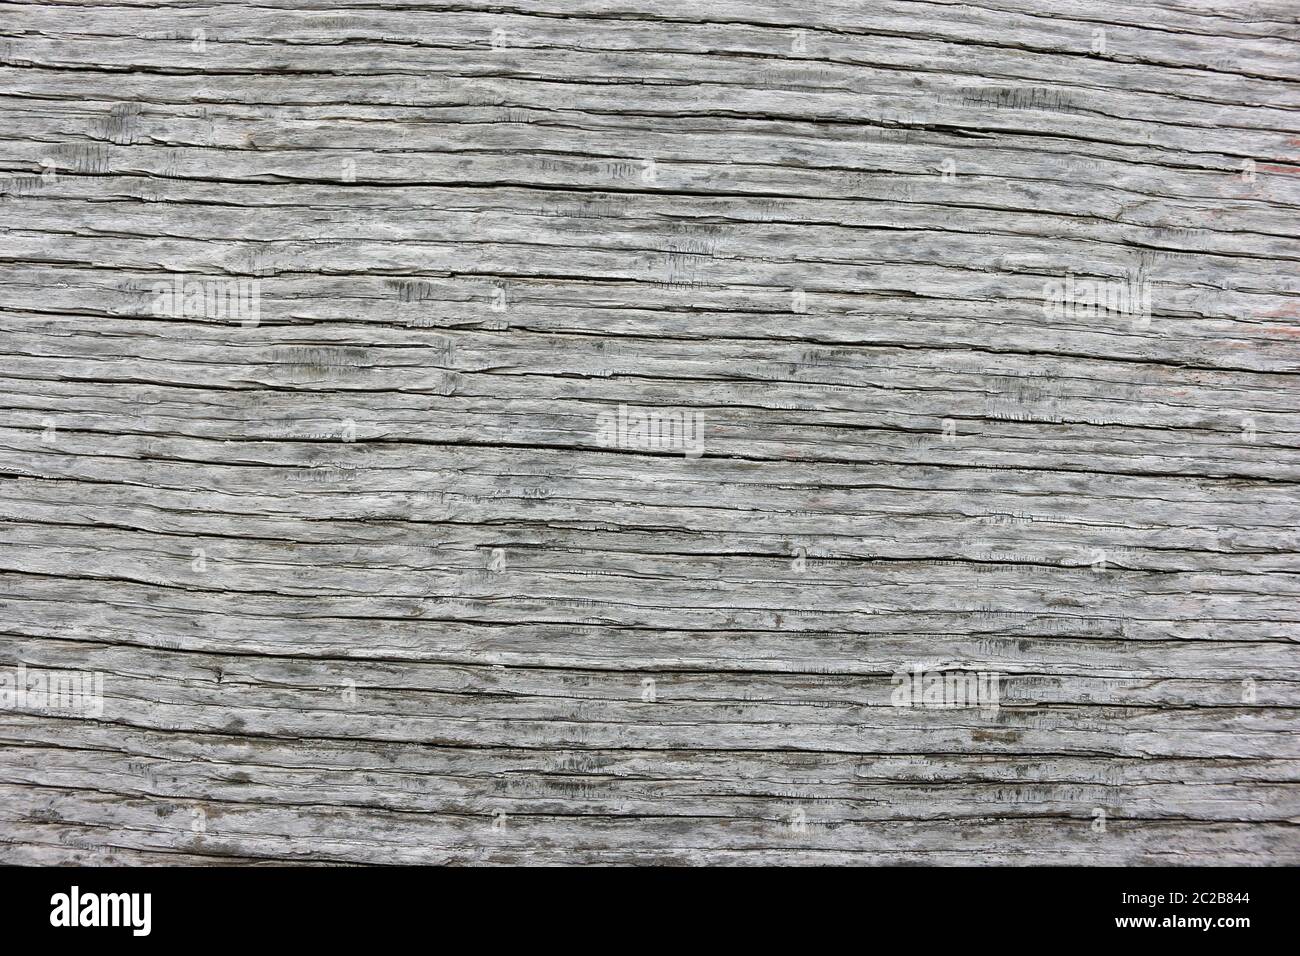 Old wooden oak house beam lime washed and dating back to tudor times which could be used as a background or texture. Stock Photo